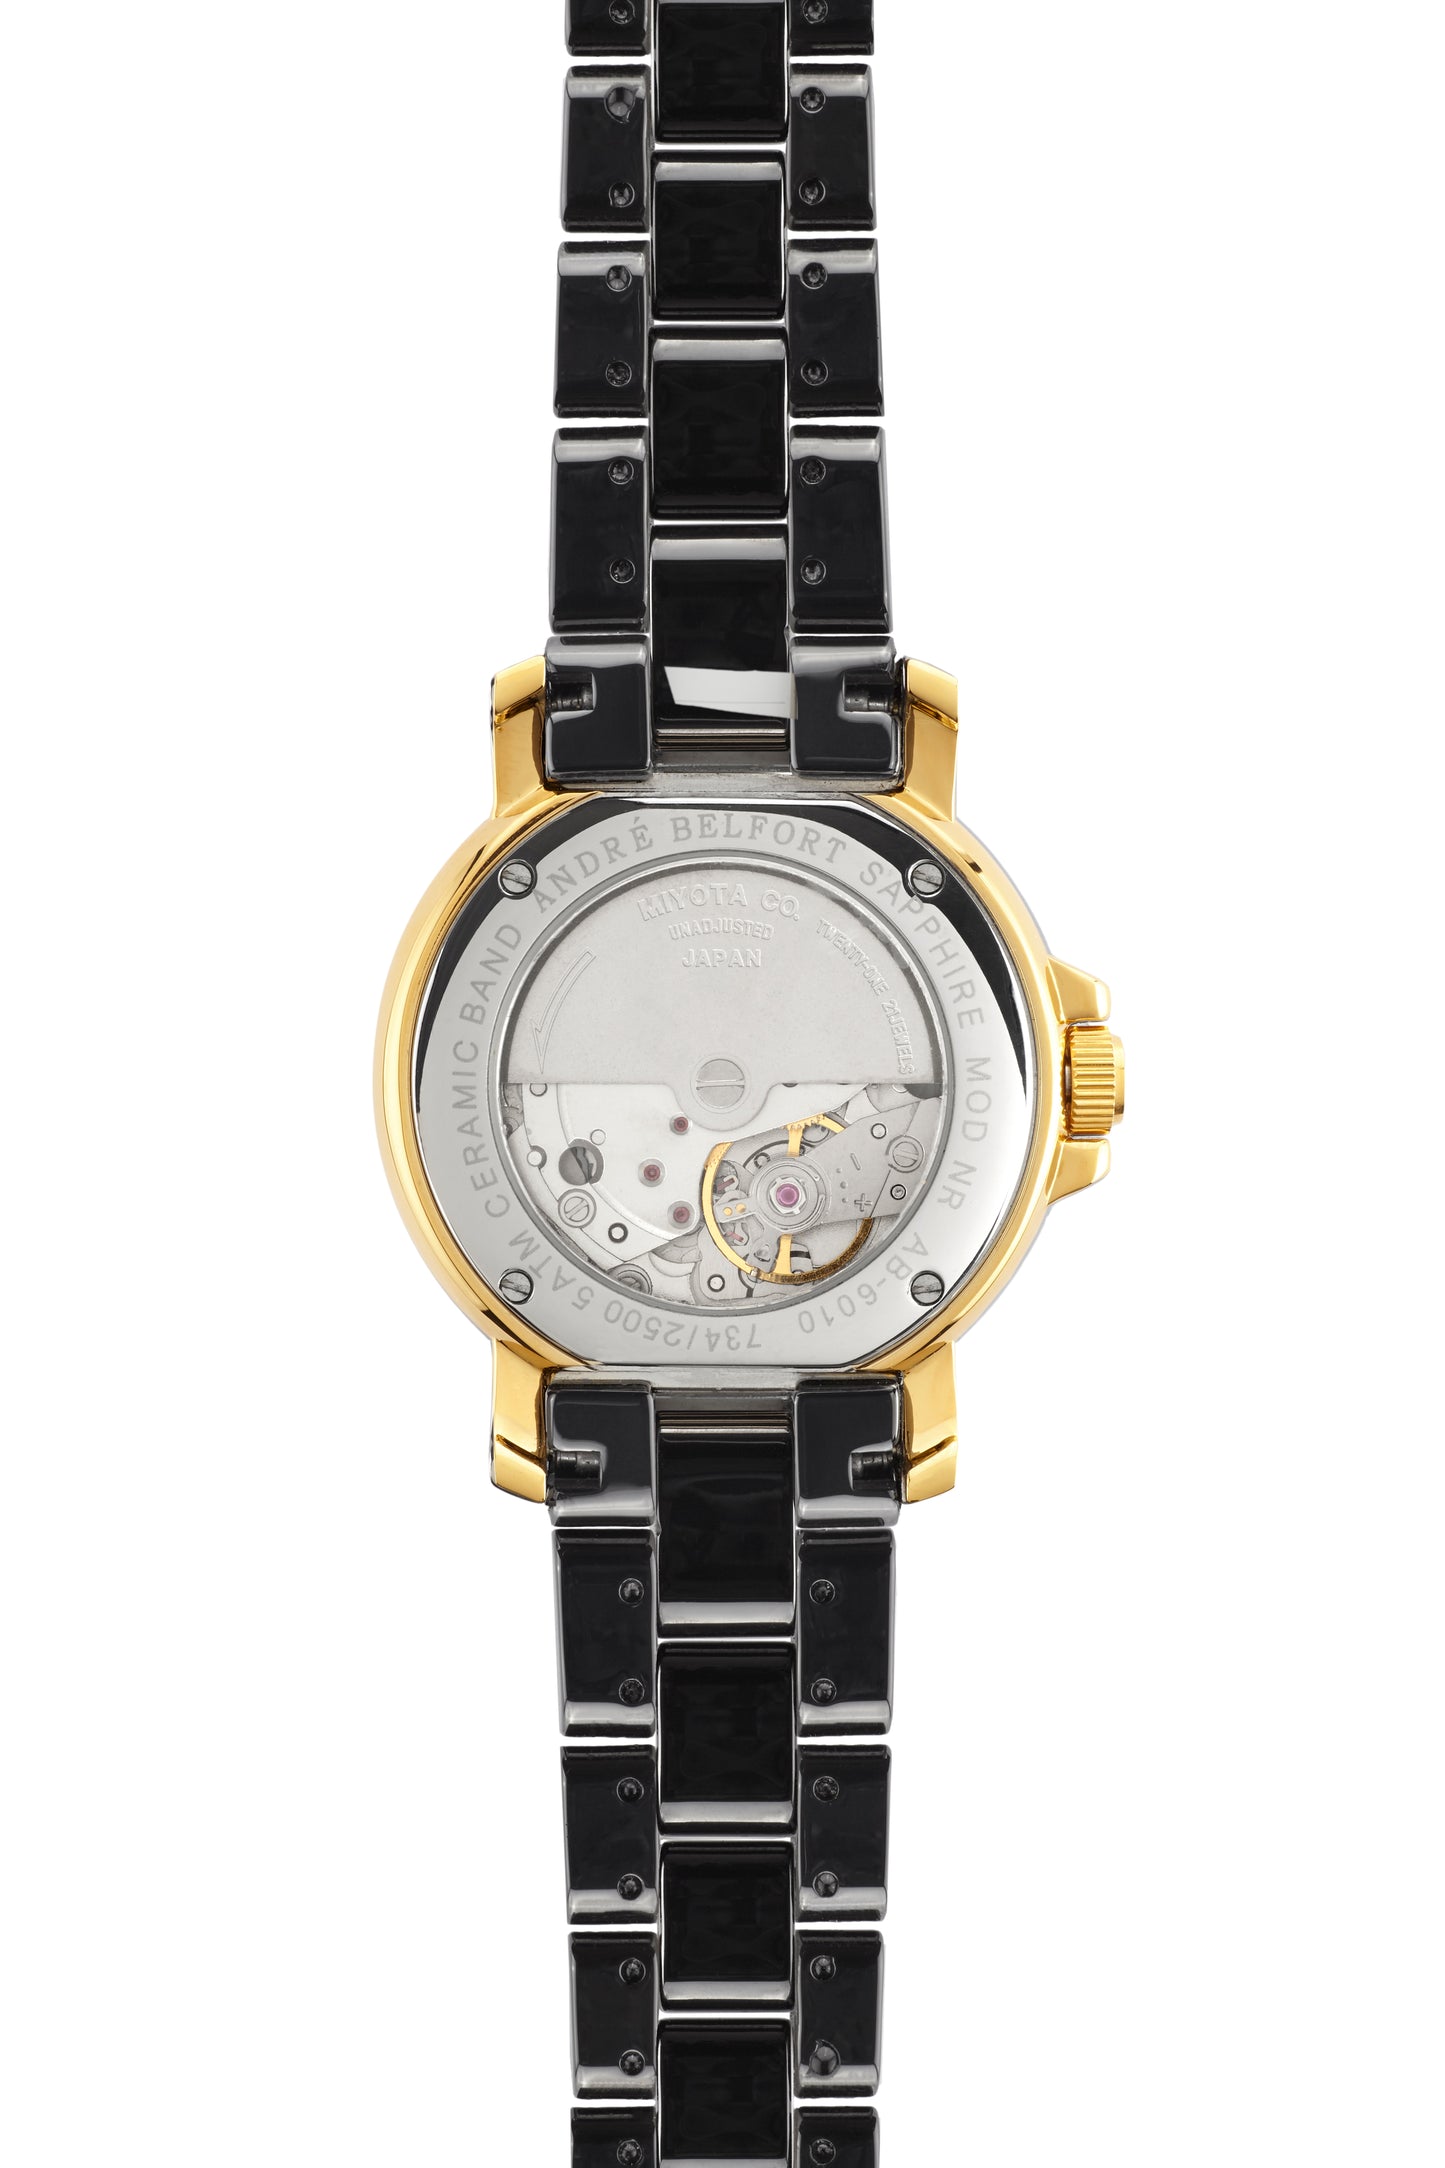 Automatic watches — Aphrodite — André Belfort — gold Zirkonia No.2